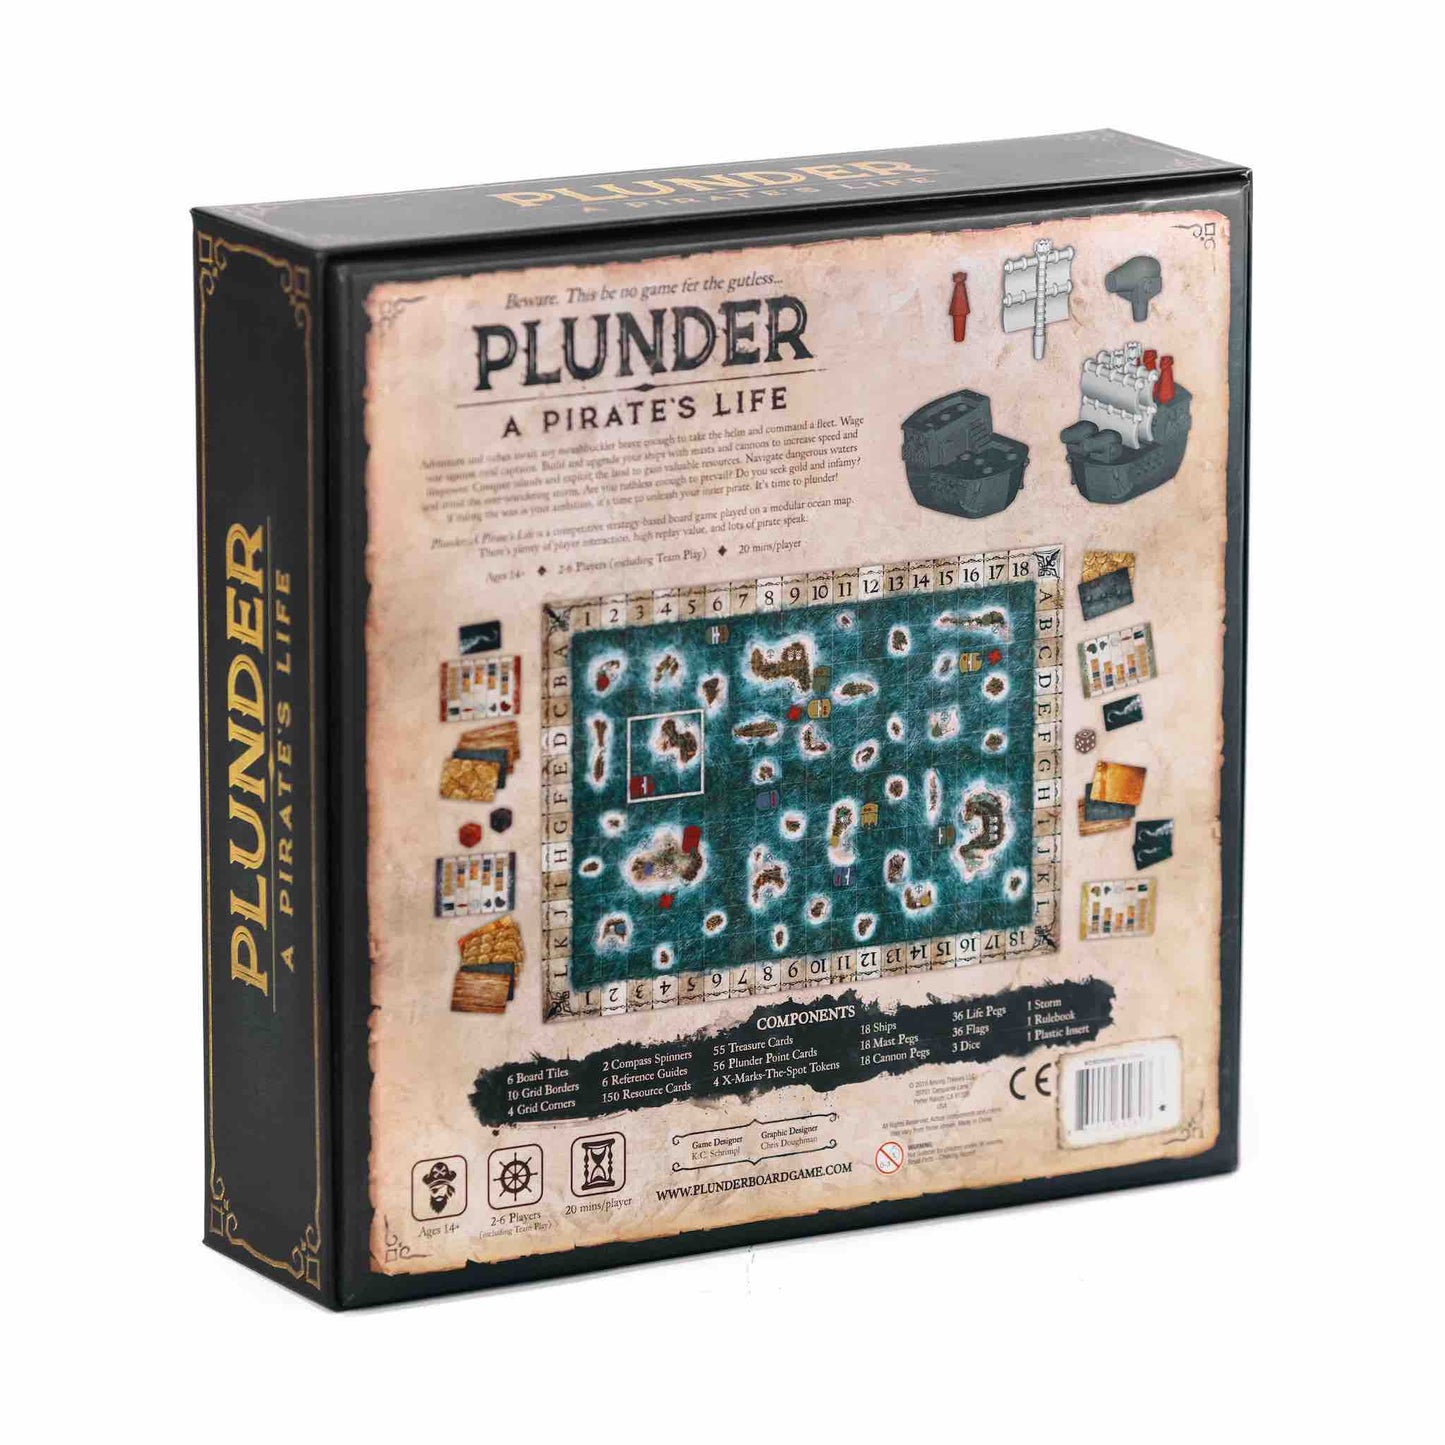 Plunder: A Pirate's Life